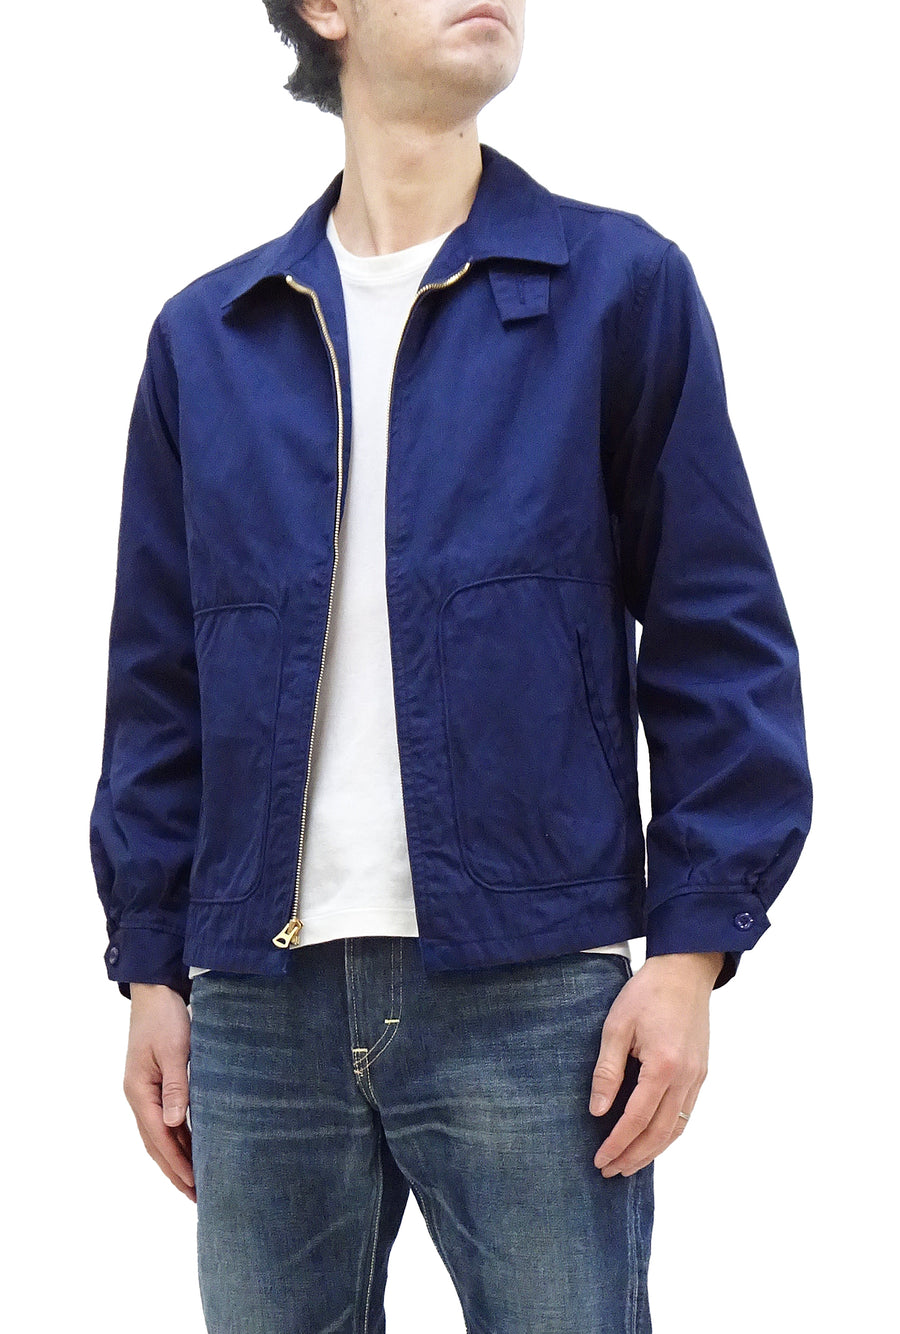 Sugar Cane Jacket Men's Casual 1950s Style Lightweight Unlined Cotton Jacket SC15293 128 Navy-Blue